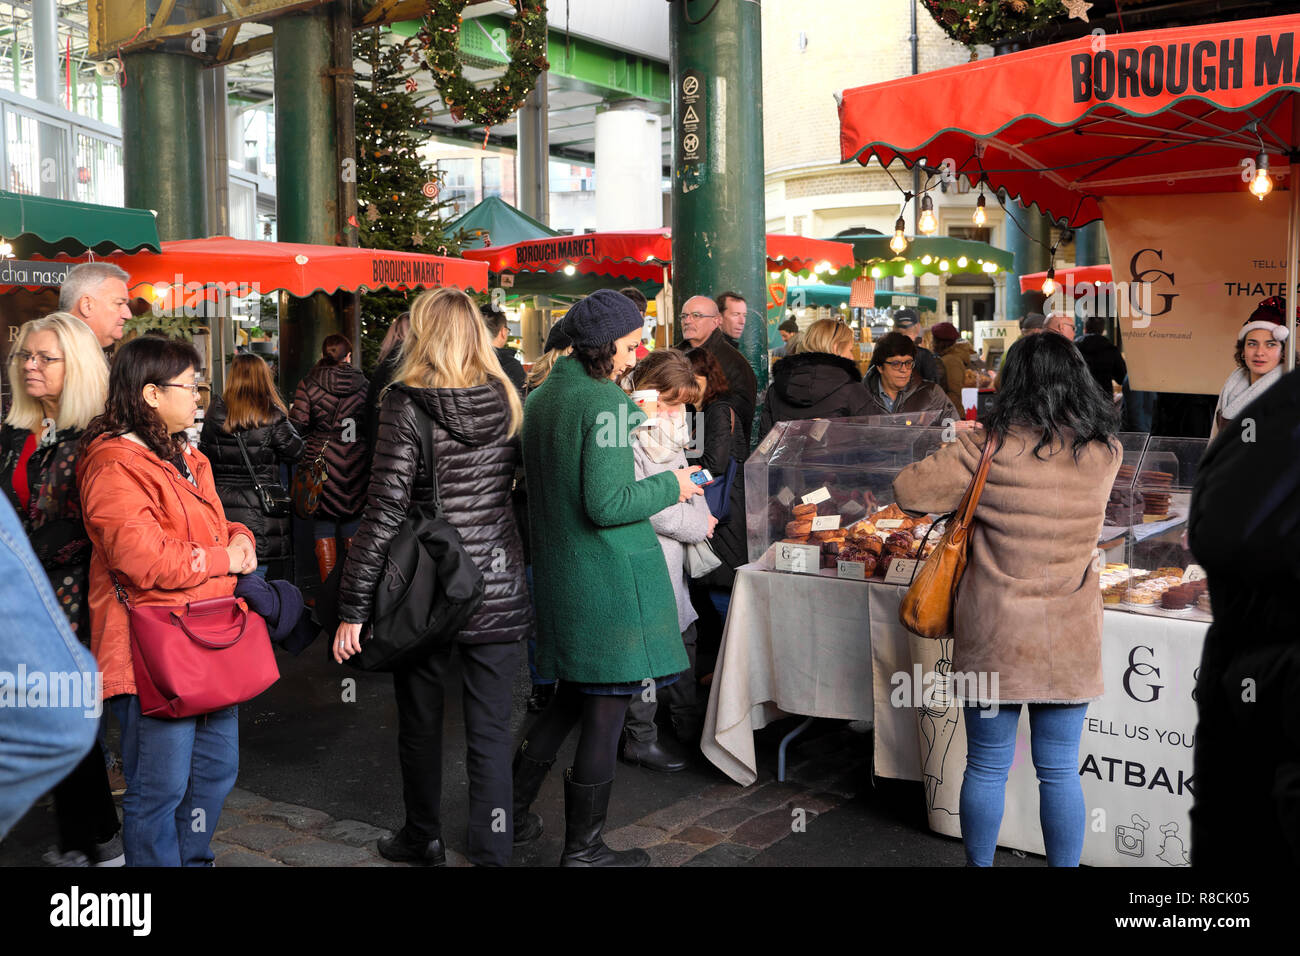 Crowd of people looking at food stalls inside Borough Market at Christmas time in Southwark, South London UK  KATHY DEWITT Stock Photo